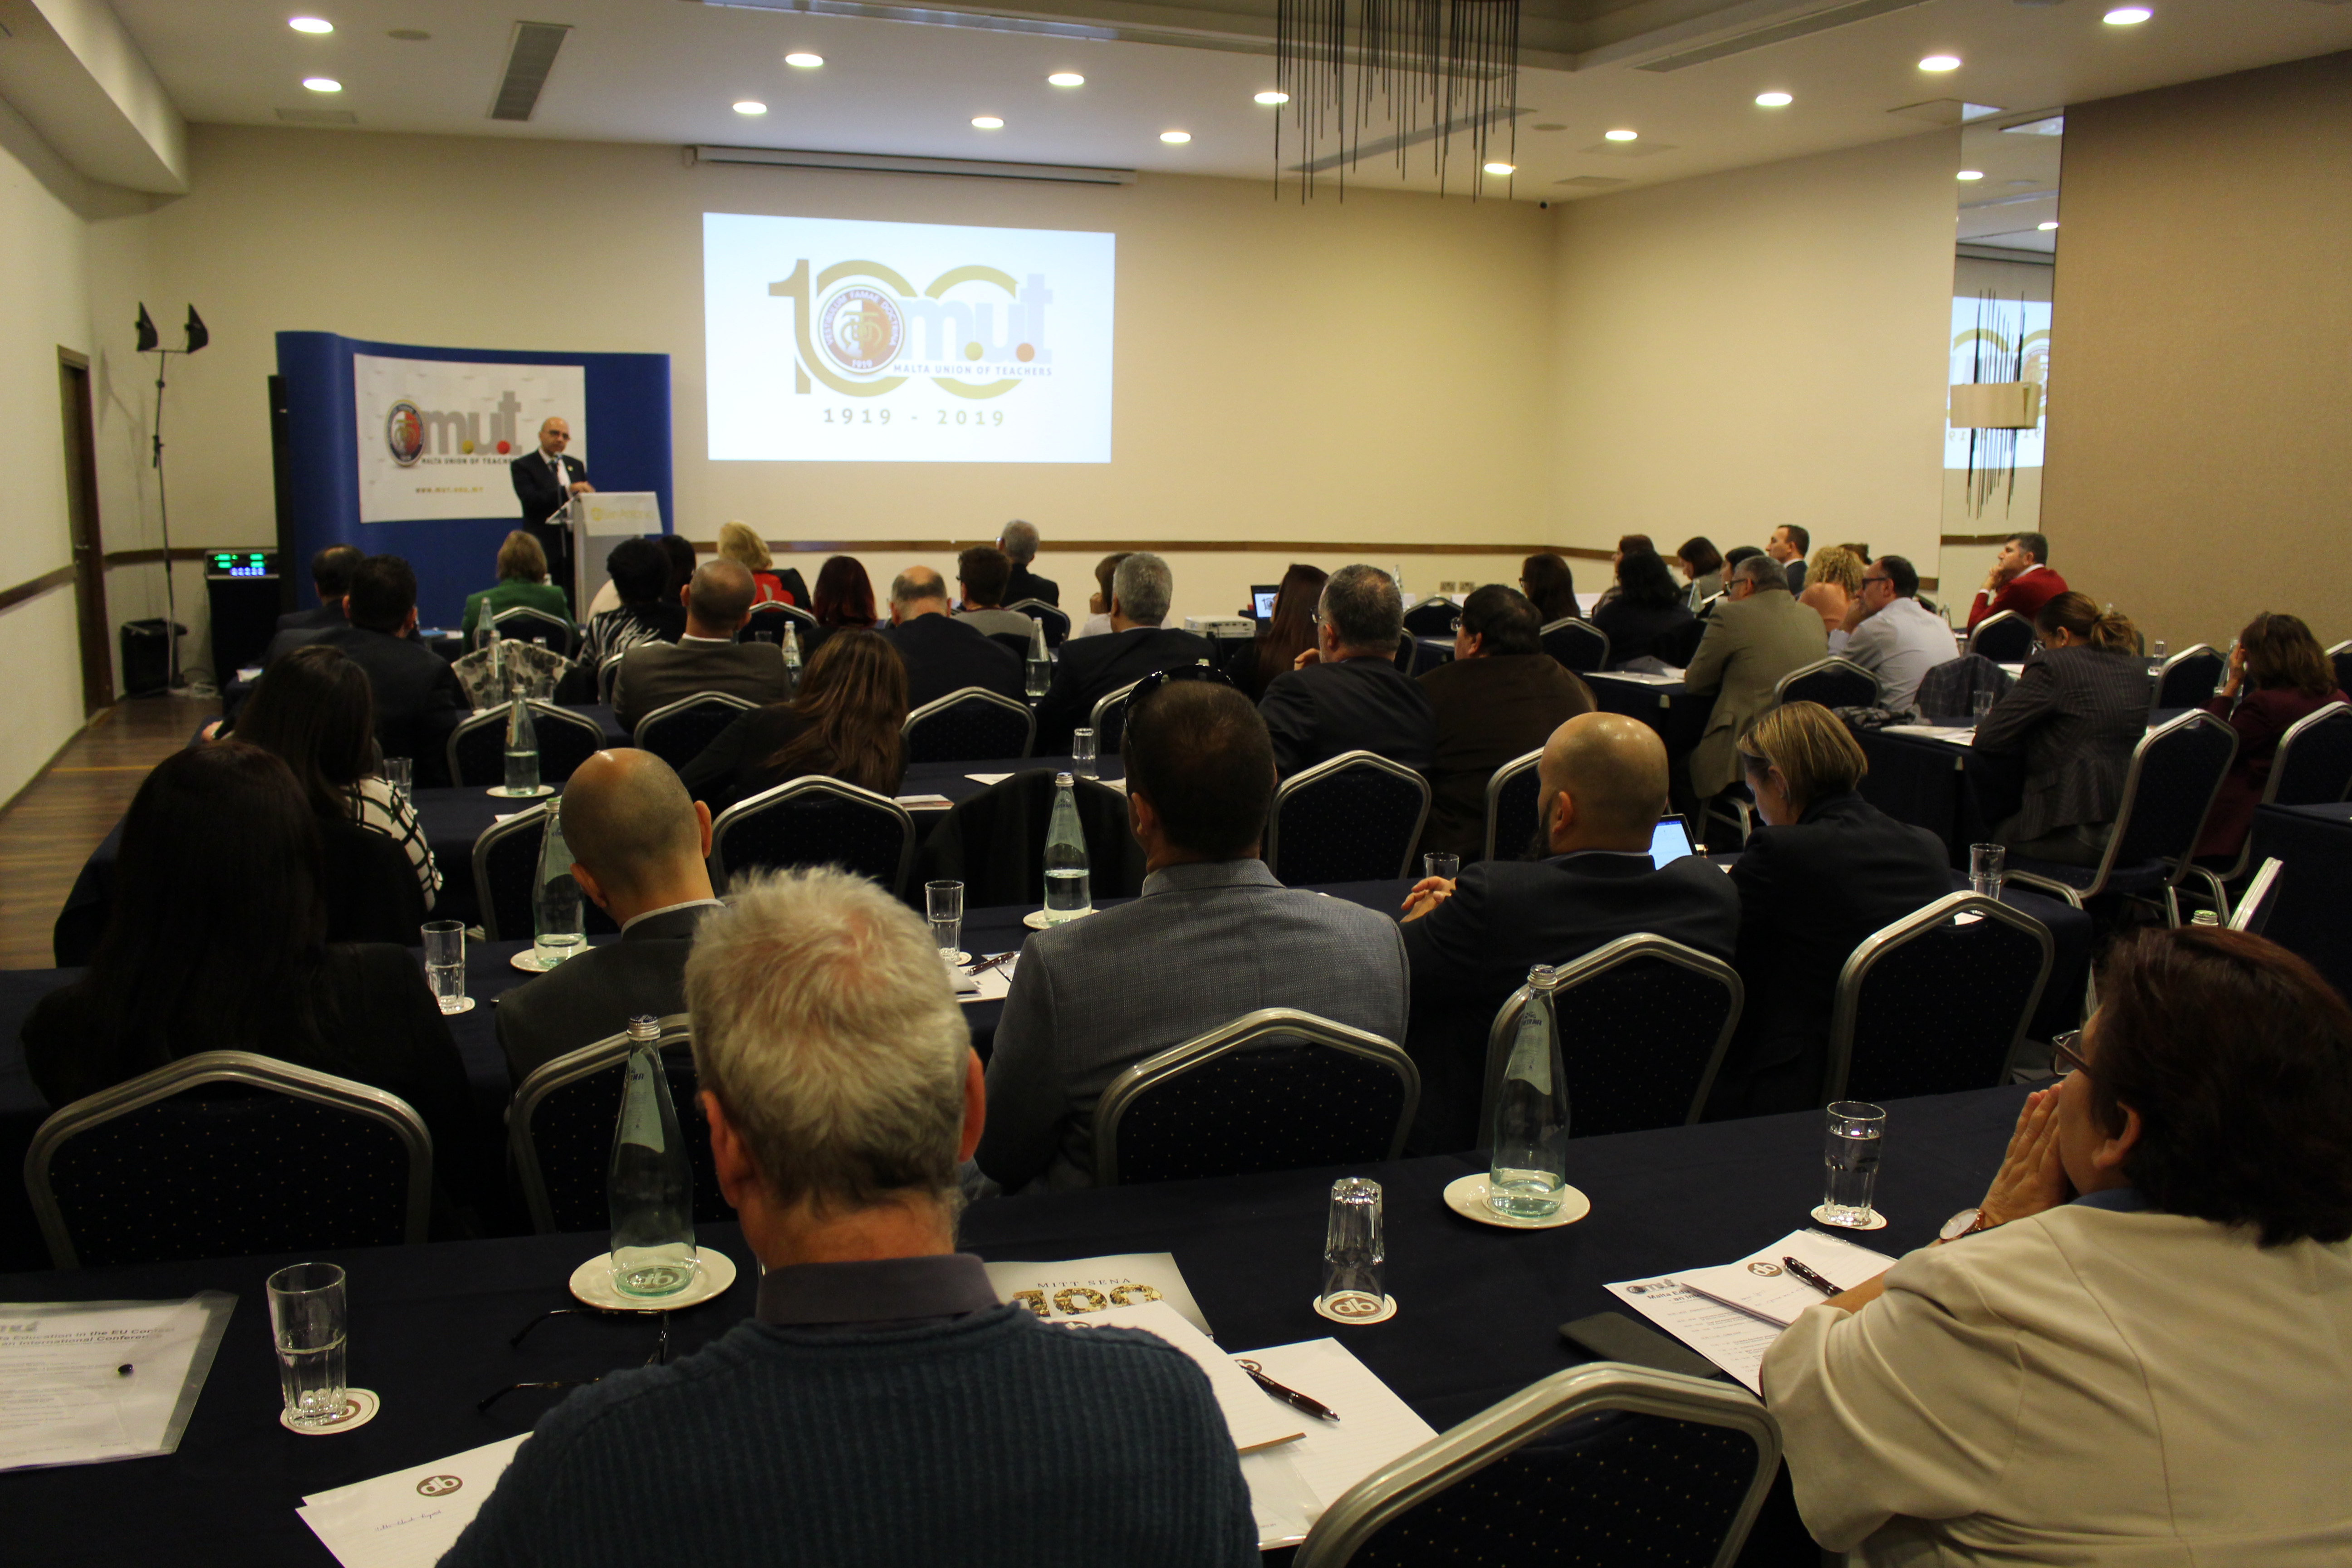 MUT International Conference part of centenary celebrations – 80.5% agree with principles underlying Malta Education proposal